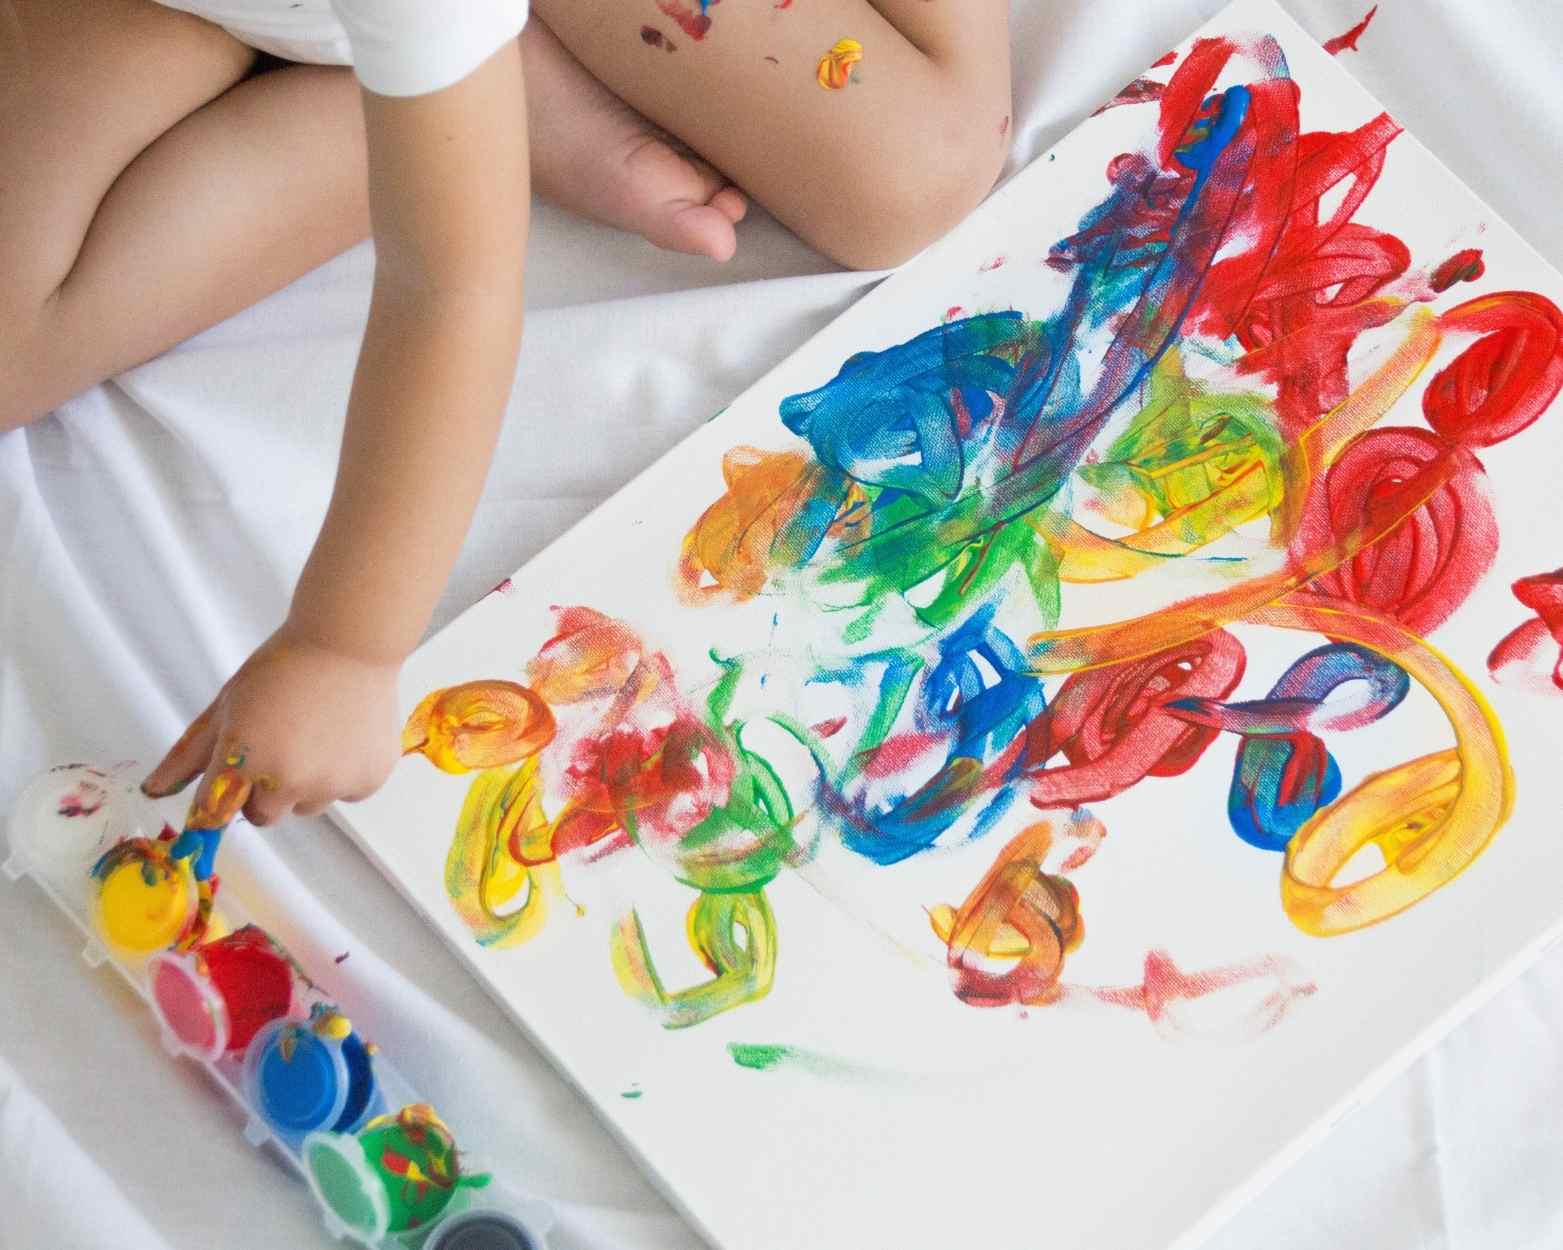 A toddler using finger paint to paint a canvas on a sheet which is a mom hack.